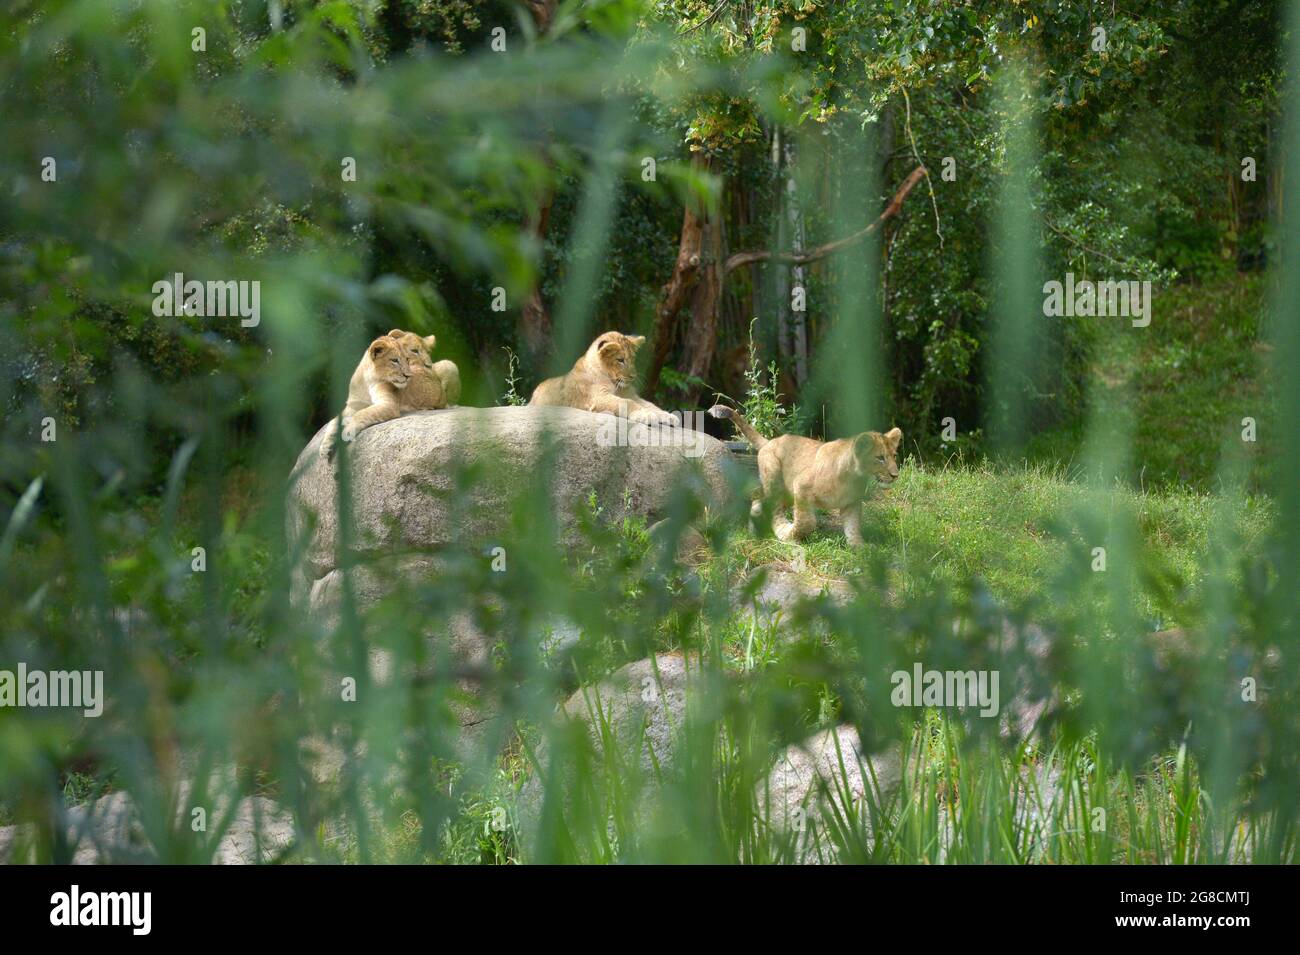 Leipzig, Germany. 05th July, 2021. The four lion cubs Jasira, Juma, Kossi and Kiyan of mother lion Kigali and male lion Majo sit in the outdoor area at Leipzig Zoo and watch the zoo visitors. Credit: Volkmar Heinz/dpa-Zentralbild/ZB/dpa/Alamy Live News Stock Photo